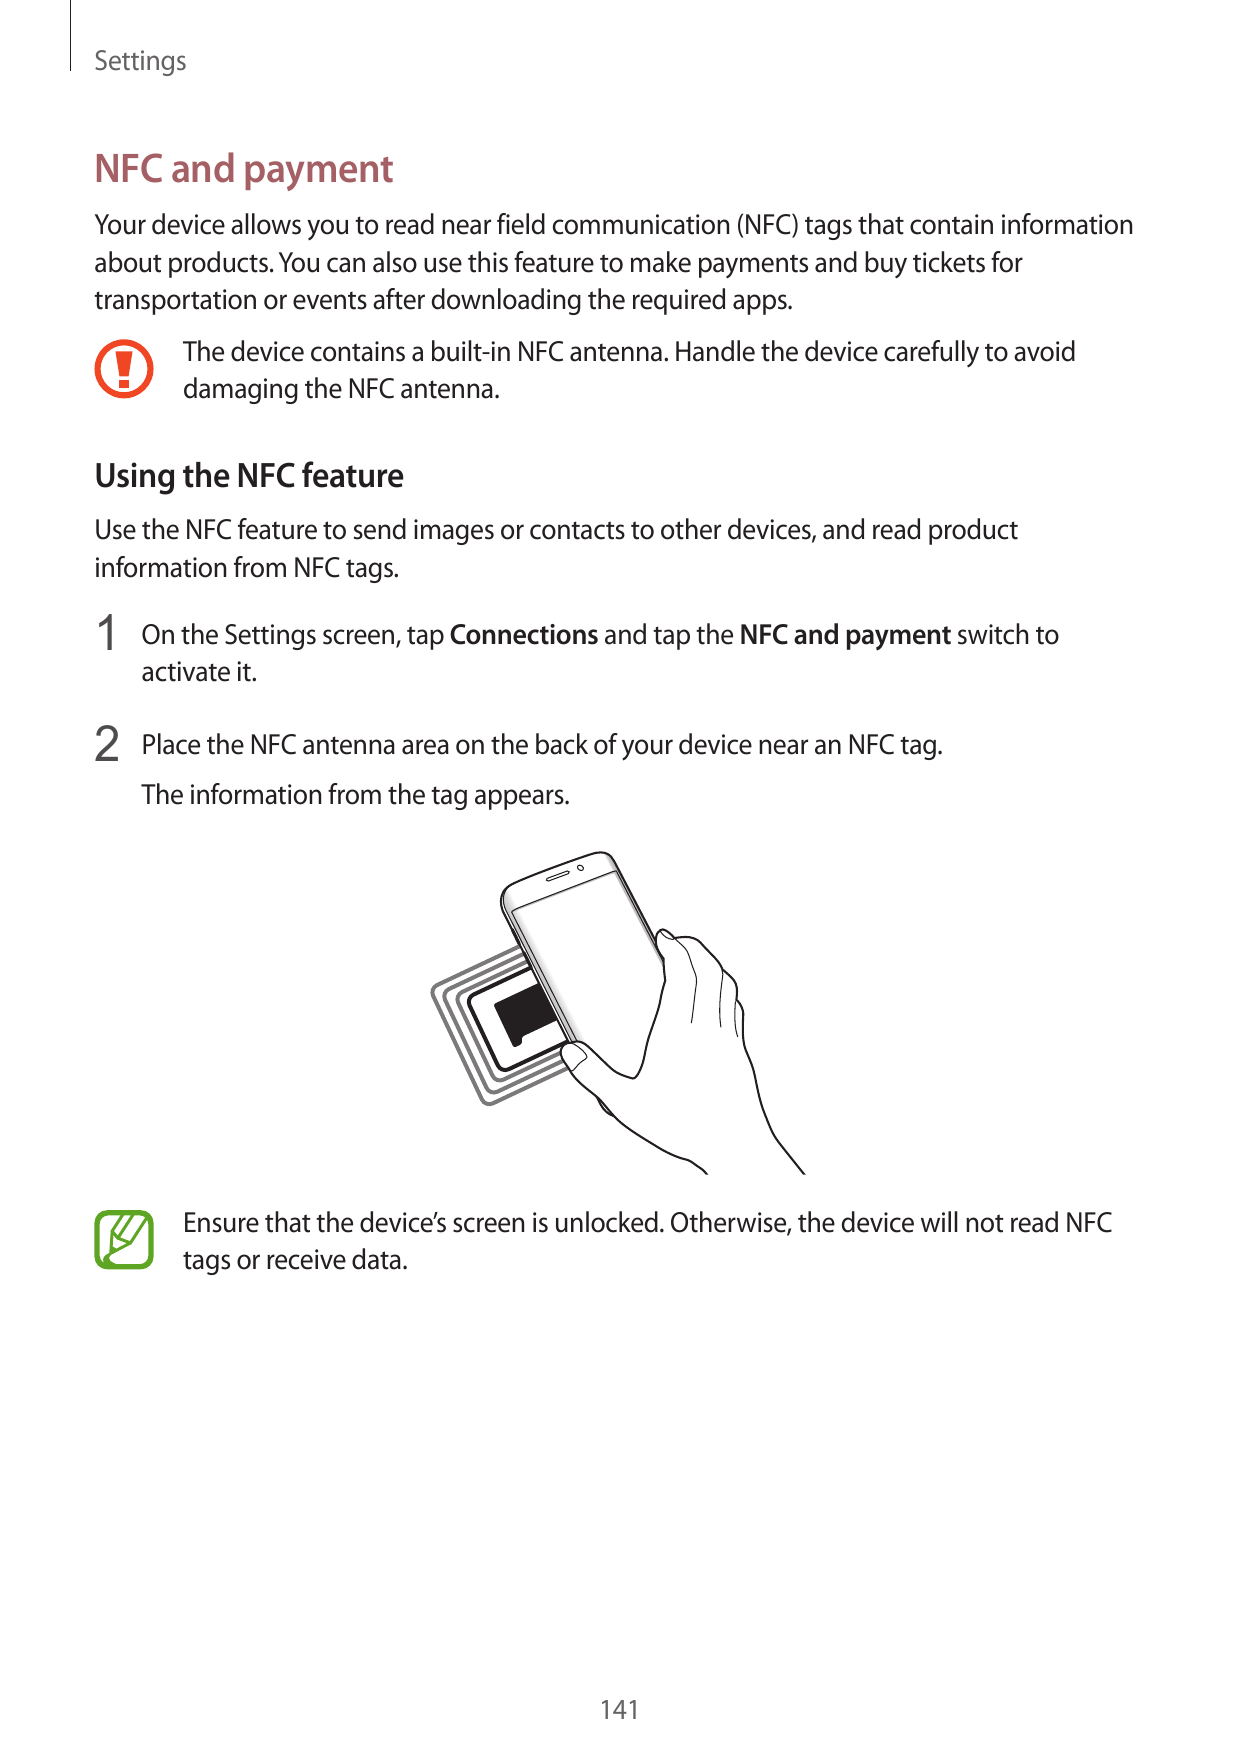 SettingsNFC and paymentYour device allows you to read near field communication (NFC) tags that contain informationabout products